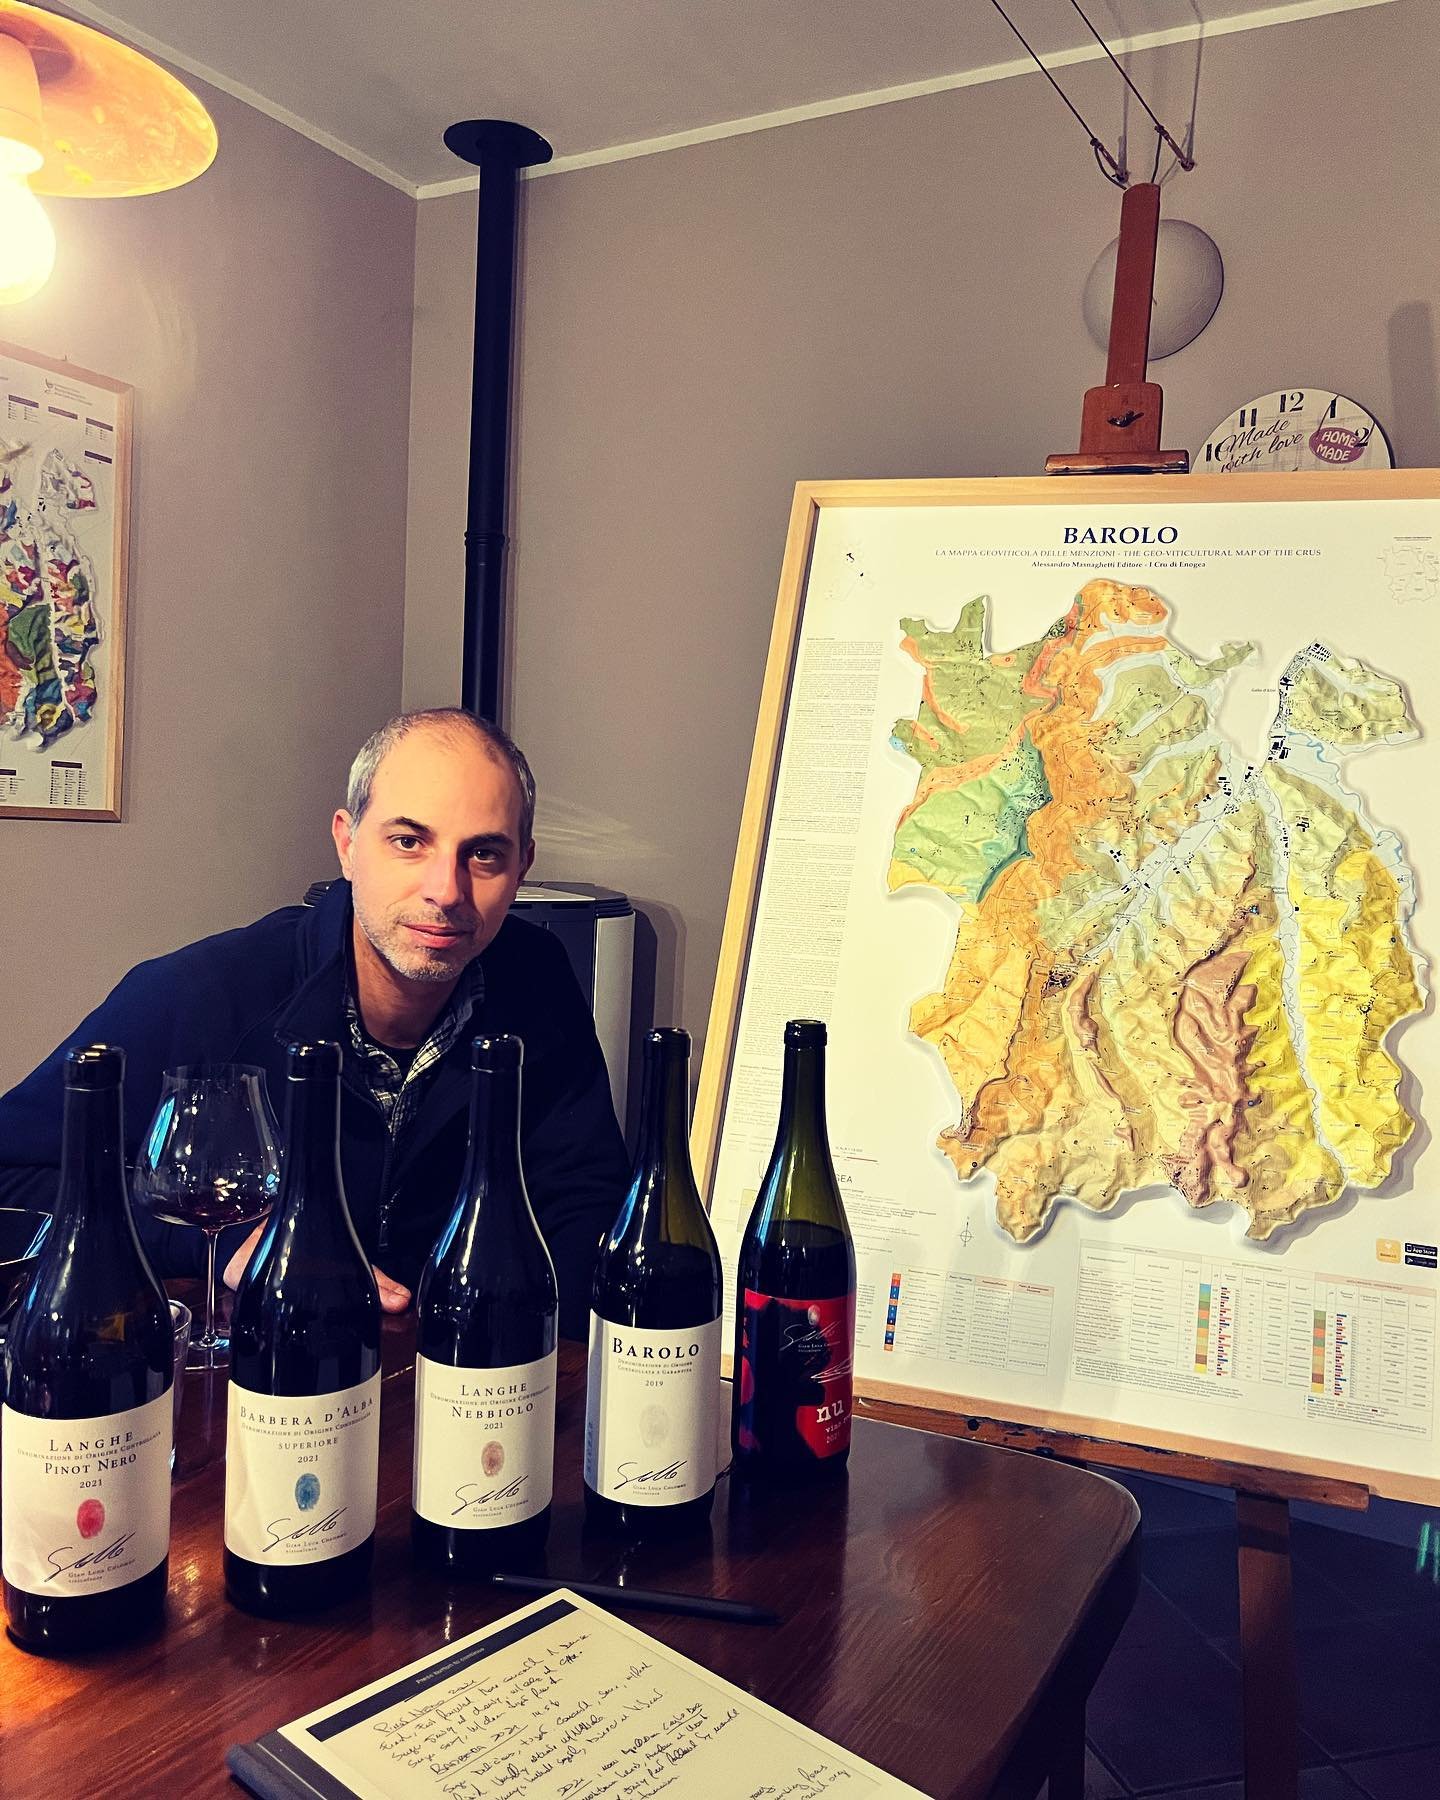 A study of Barolo and its soils, through  the lens of @gianluca_colombovini 🤩❤️🍷🇮🇹 #amazing 

#langhe #barolo #artisanalwine #luciditywinemerchants